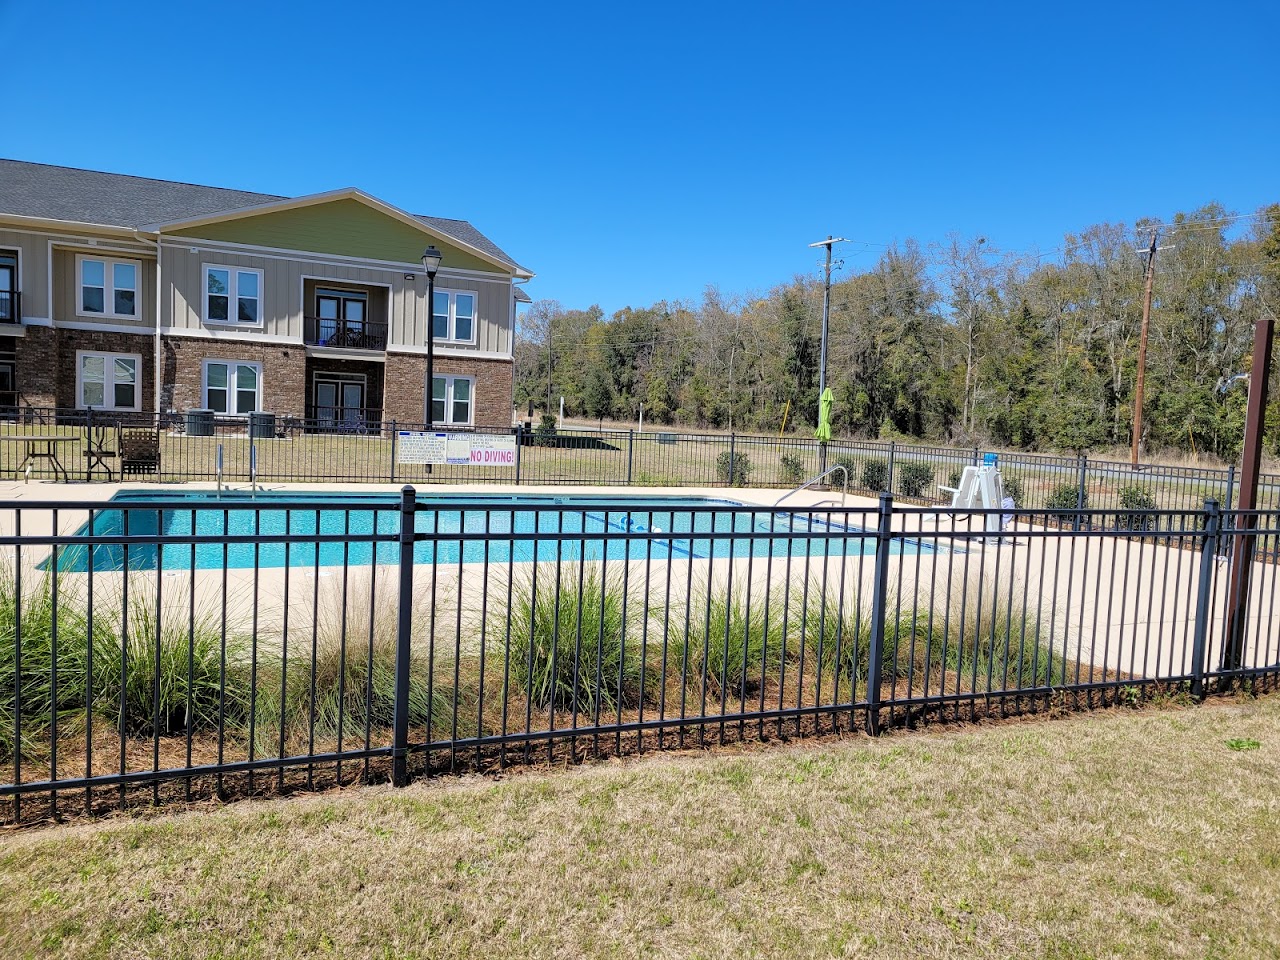 Photo of LAKEVIEW GARDENS. Affordable housing located at 2045 CASAMONICA DR LAKE PARK, GA 31636